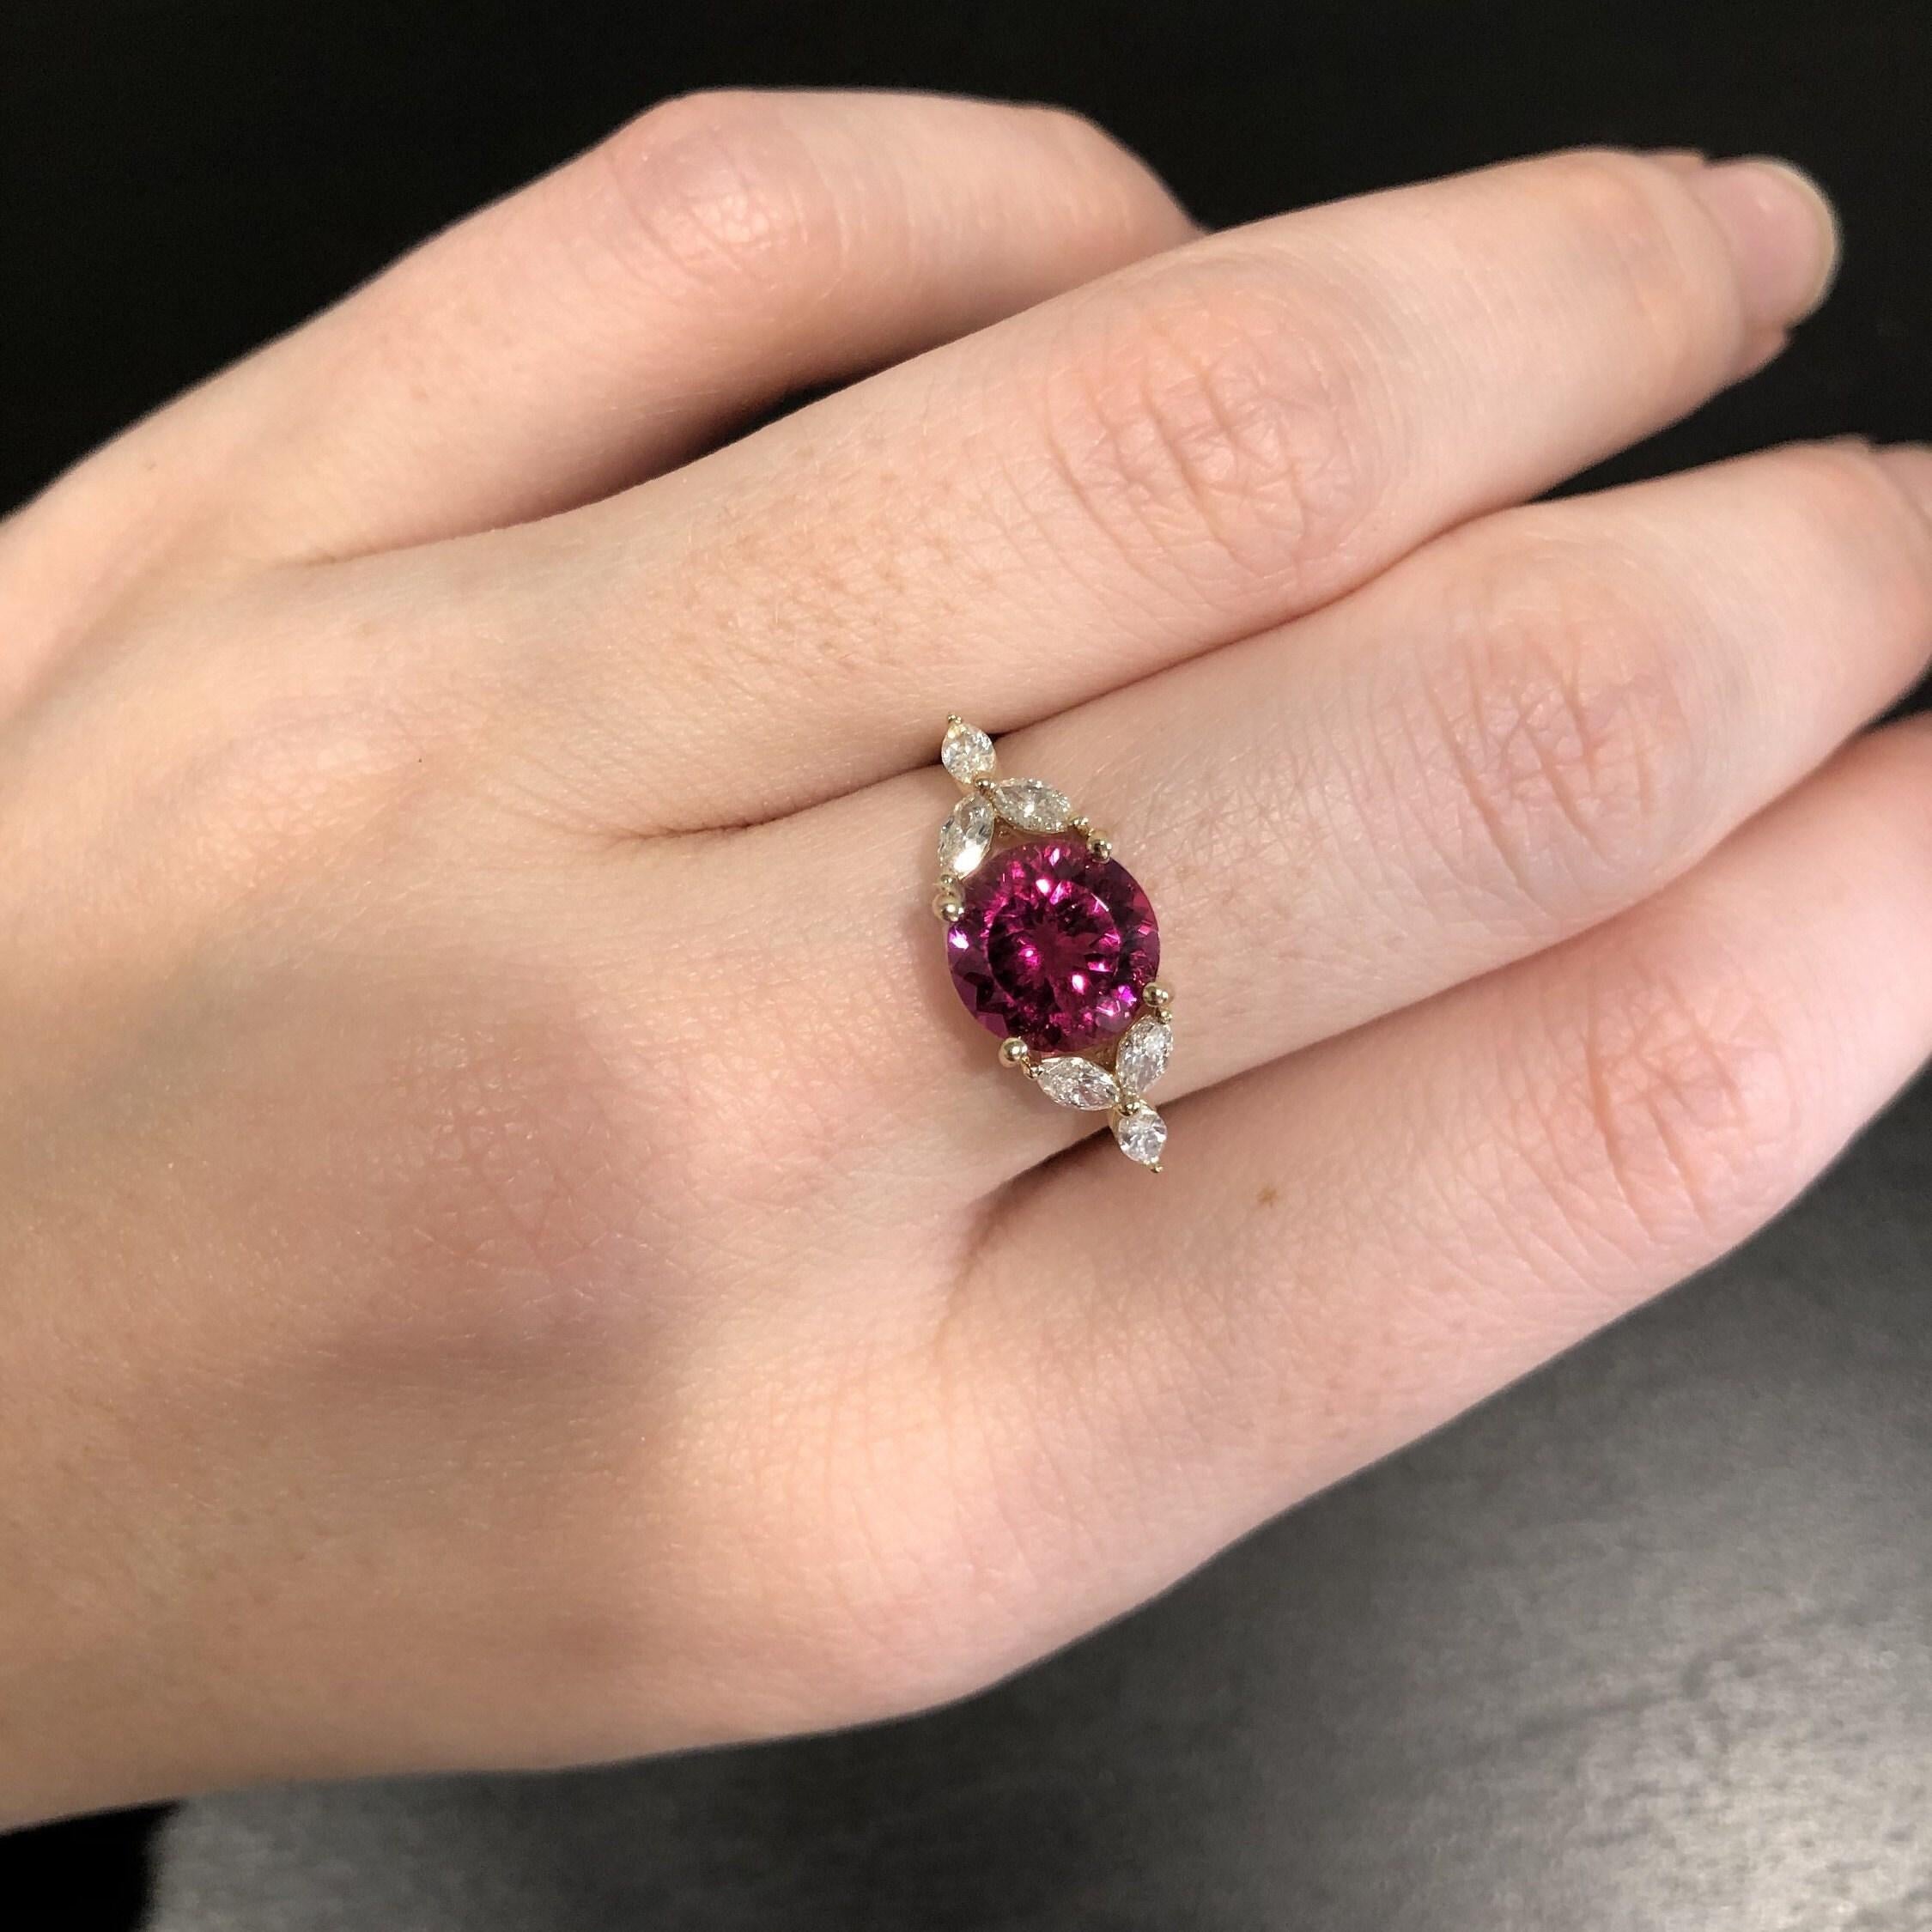 Women's 2ct Rubellite Tourmaline Ring w Earth Mined Diamonds in Solid 14k Gold Round 8mm For Sale